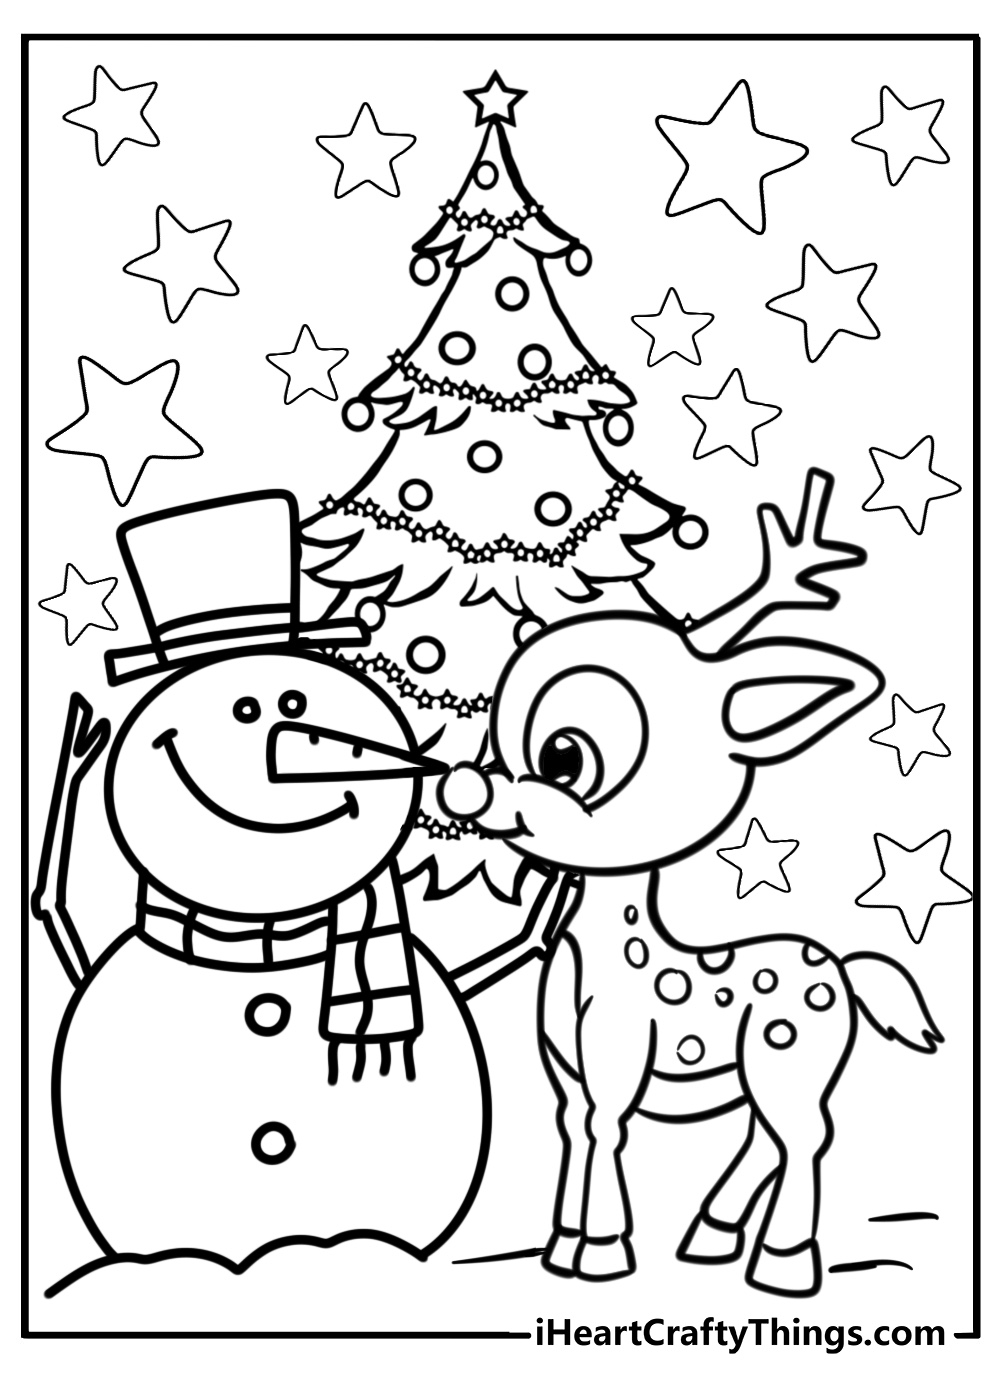 Rudolph coloring pages for christmas